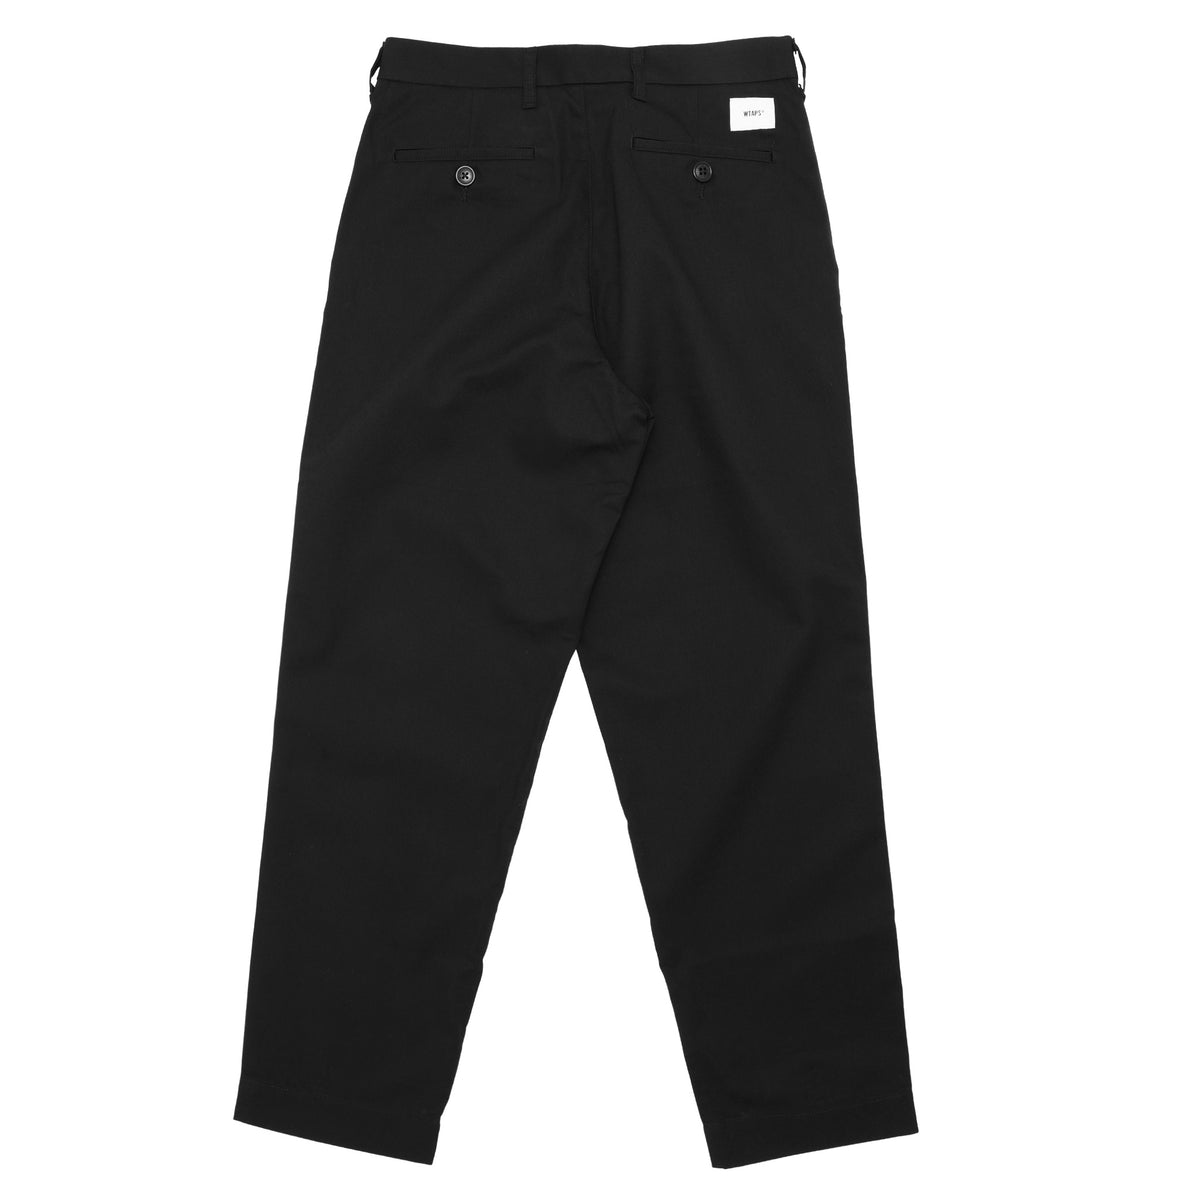 Looking for a WTAPS WRKT2001 Pant Black WTAPS to buy? Get it done now